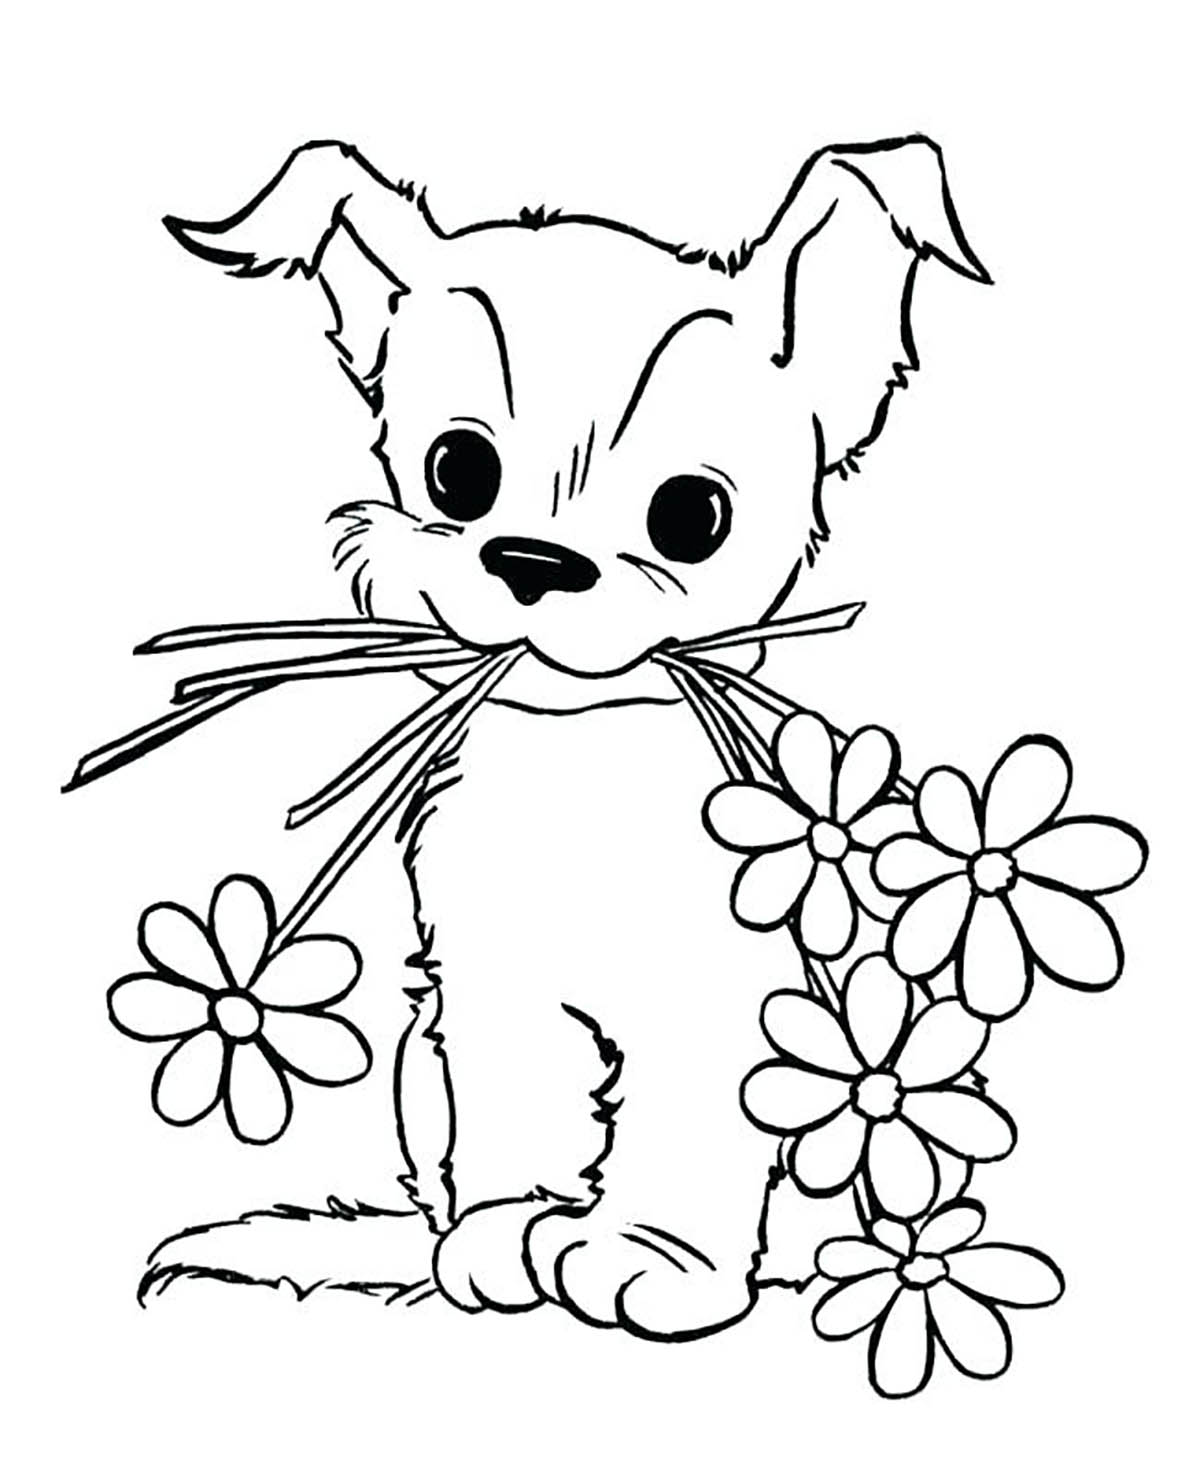 dog-and-flowers-dogs-kids-coloring-pages